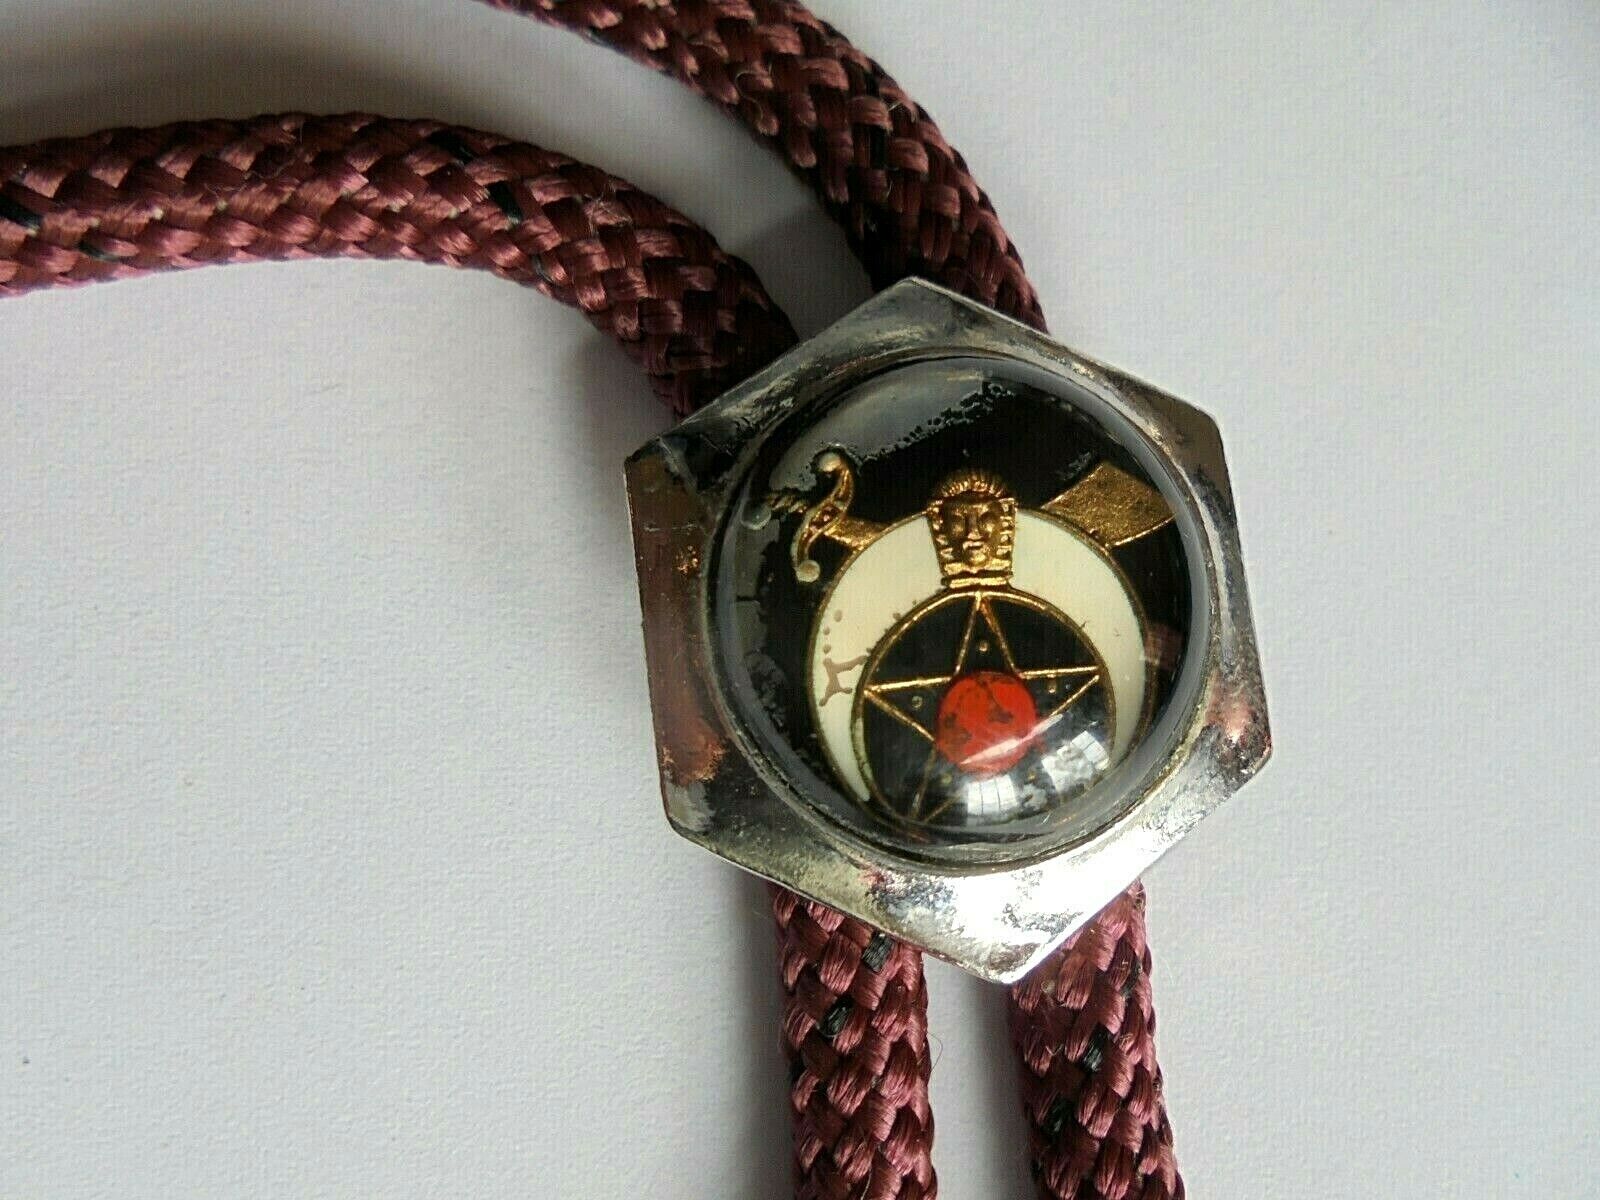 Vintage Reverse Painted Glass Dome Shriner Bolo Tie